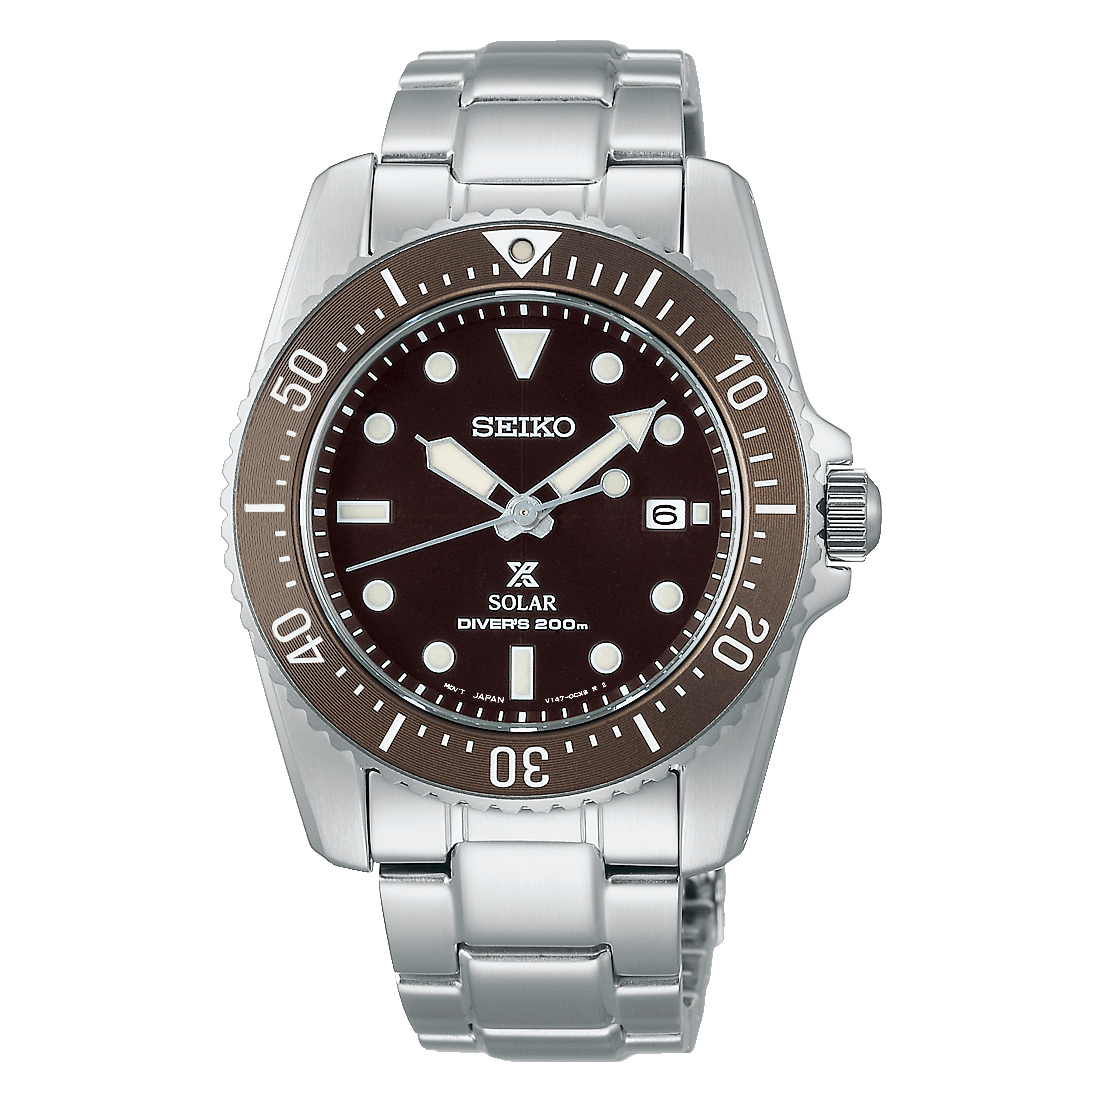 Seiko Prospex wristwatch wtih black dial brown bezel and steel case and bracelet